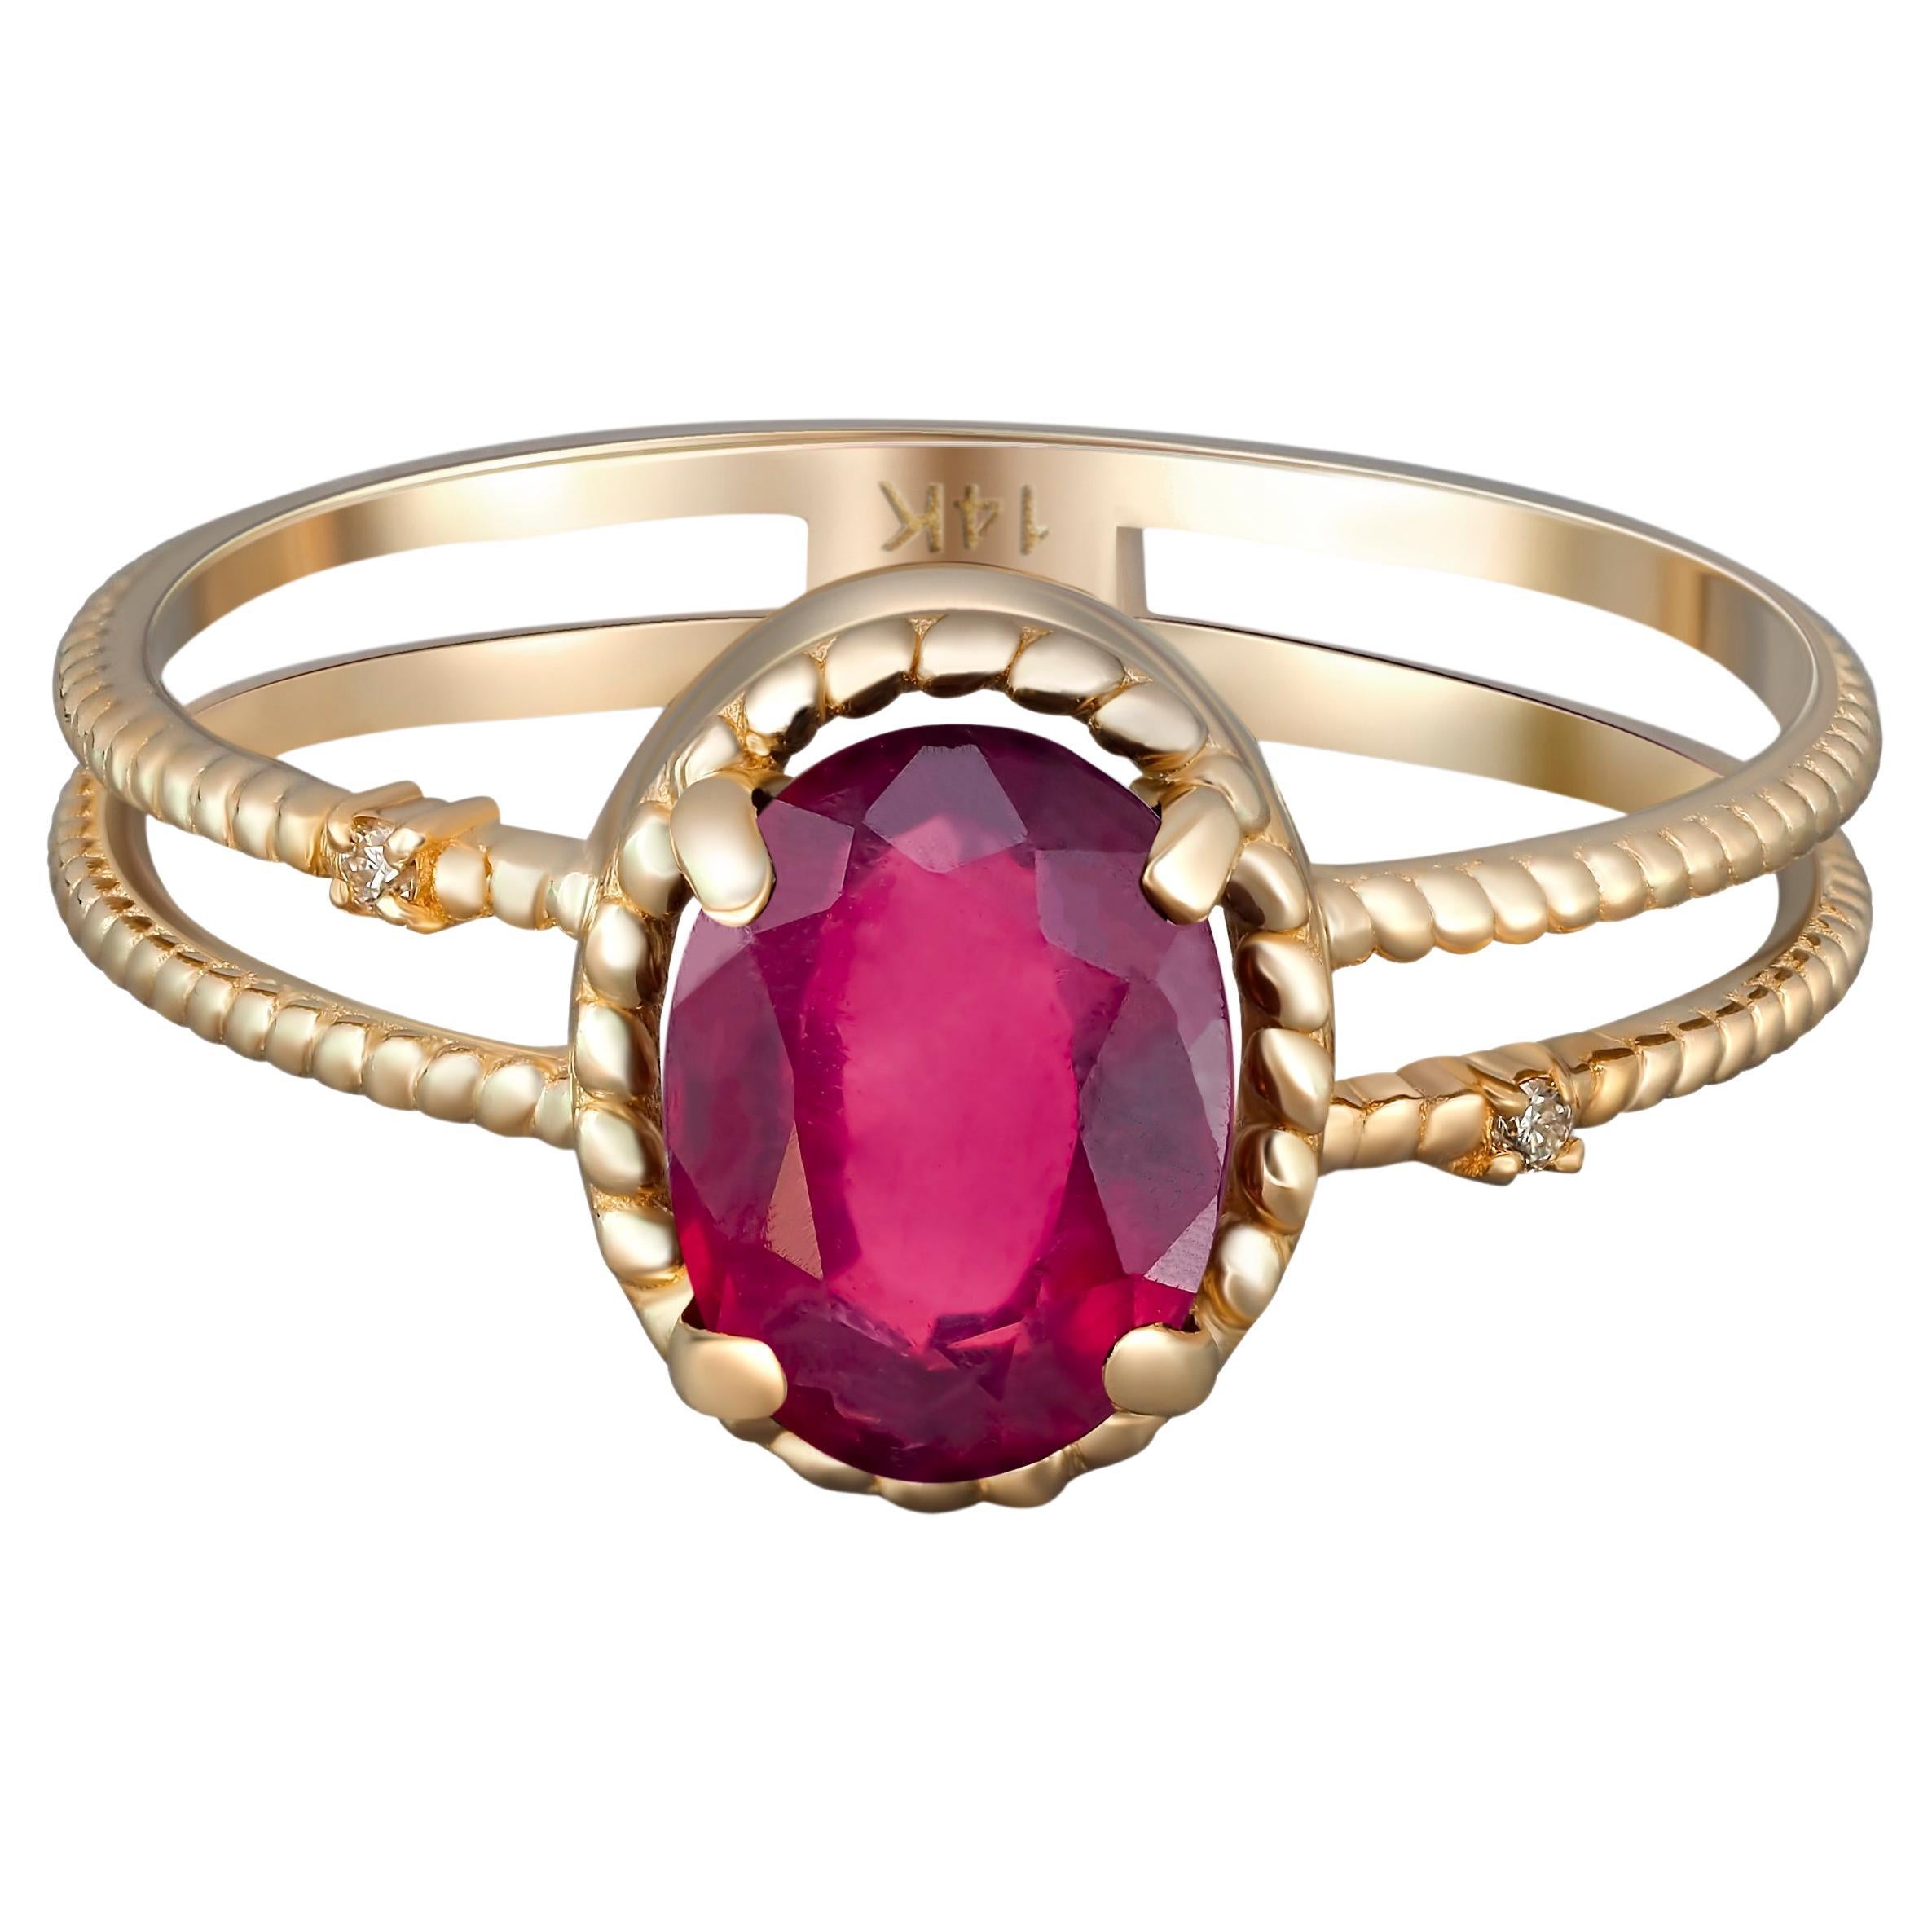 For Sale:  Oval Ruby Ring, 14k Gold Ring with Ruby, Minimalist Ruby Ring